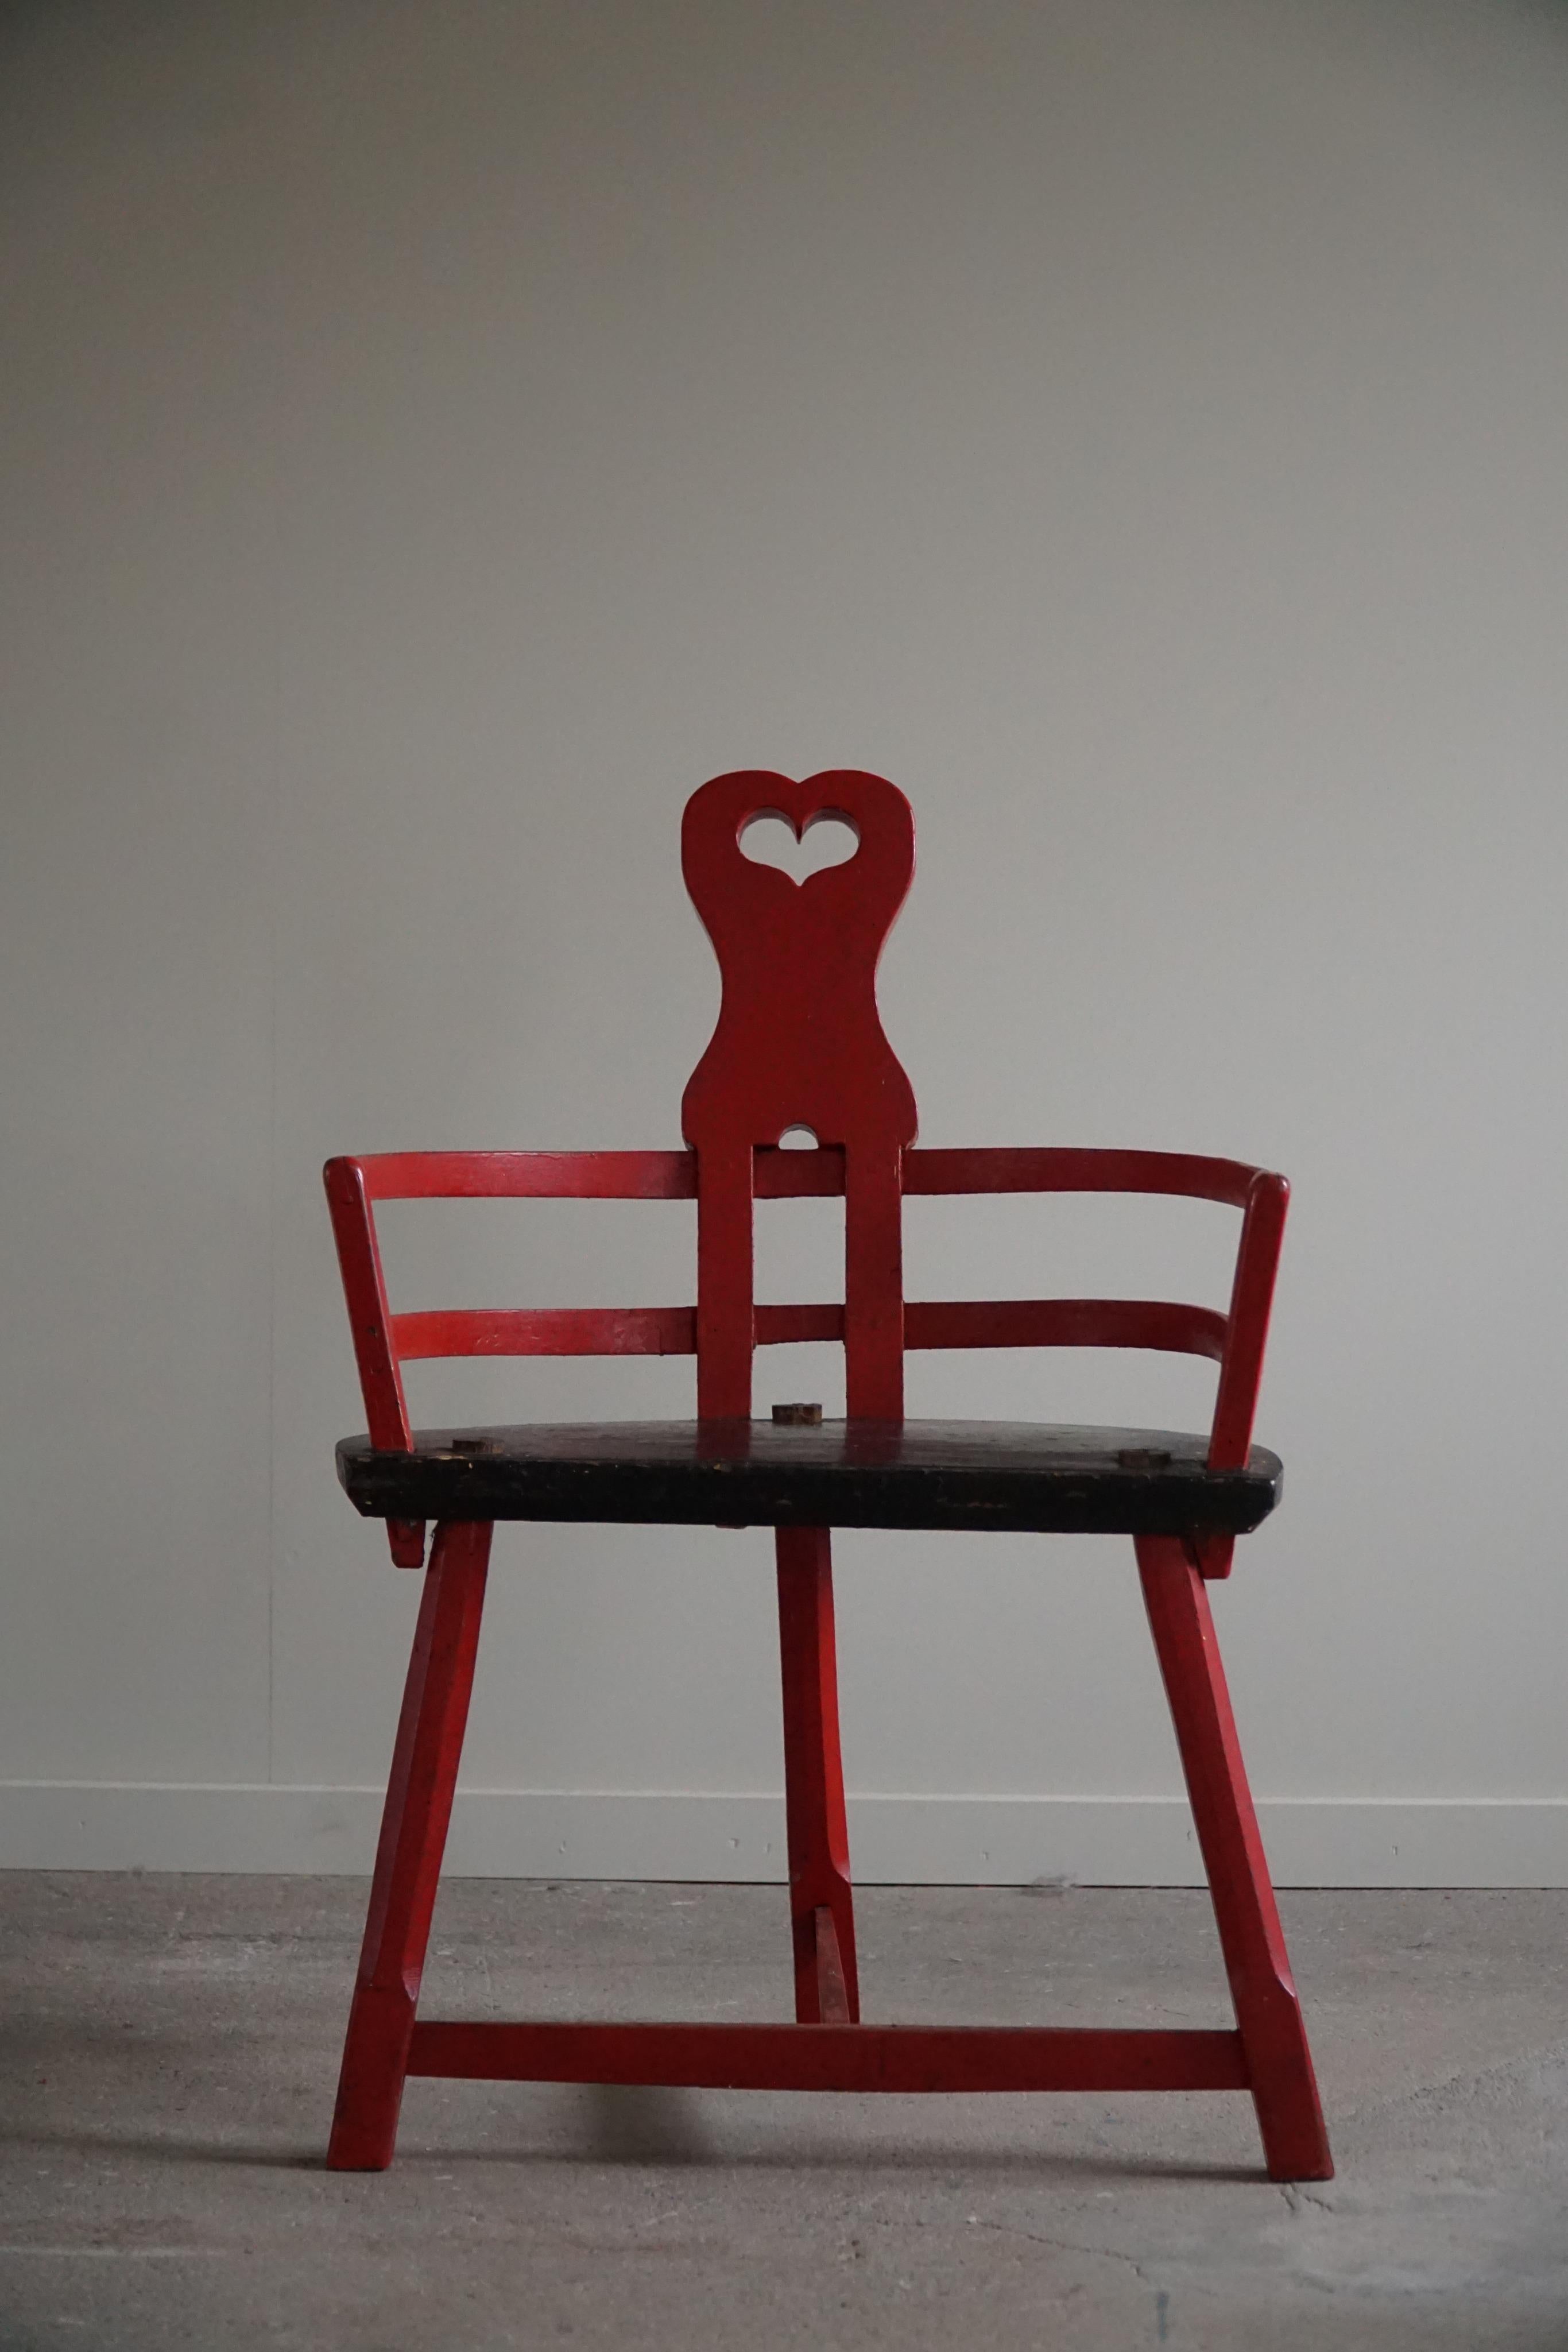 Such an elegant and decorative antique heart chair with interesting shapes. A rare decorative object made in wood and painted red with a heart in the headrest. Crafted by a cabinetmaker in Sweden ca 1900-1920. A true wabi sabi piece with 